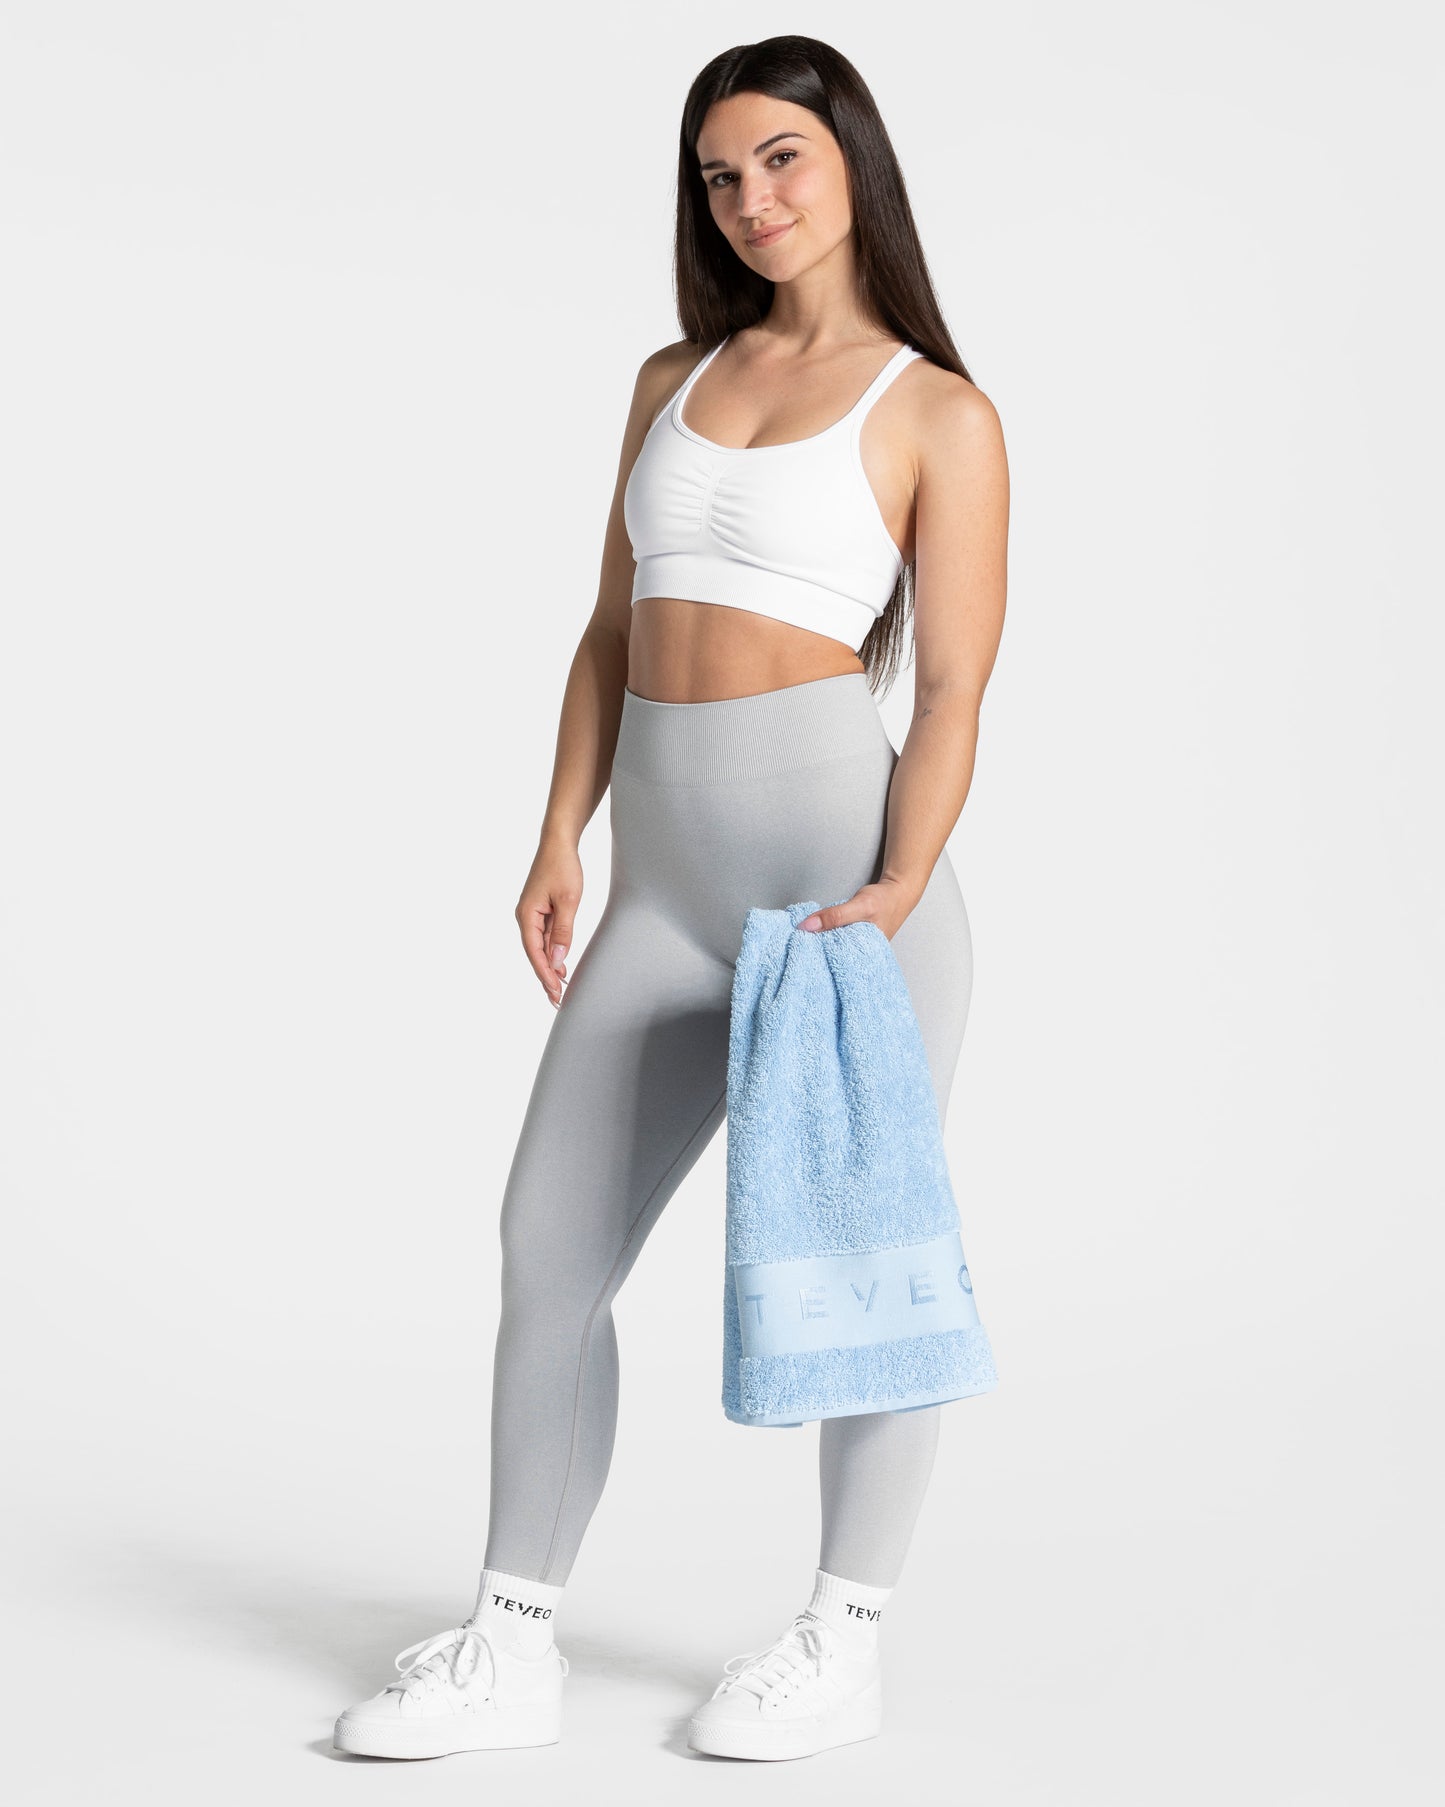 TEVEO Fitness Handtuch "Ice Blue"